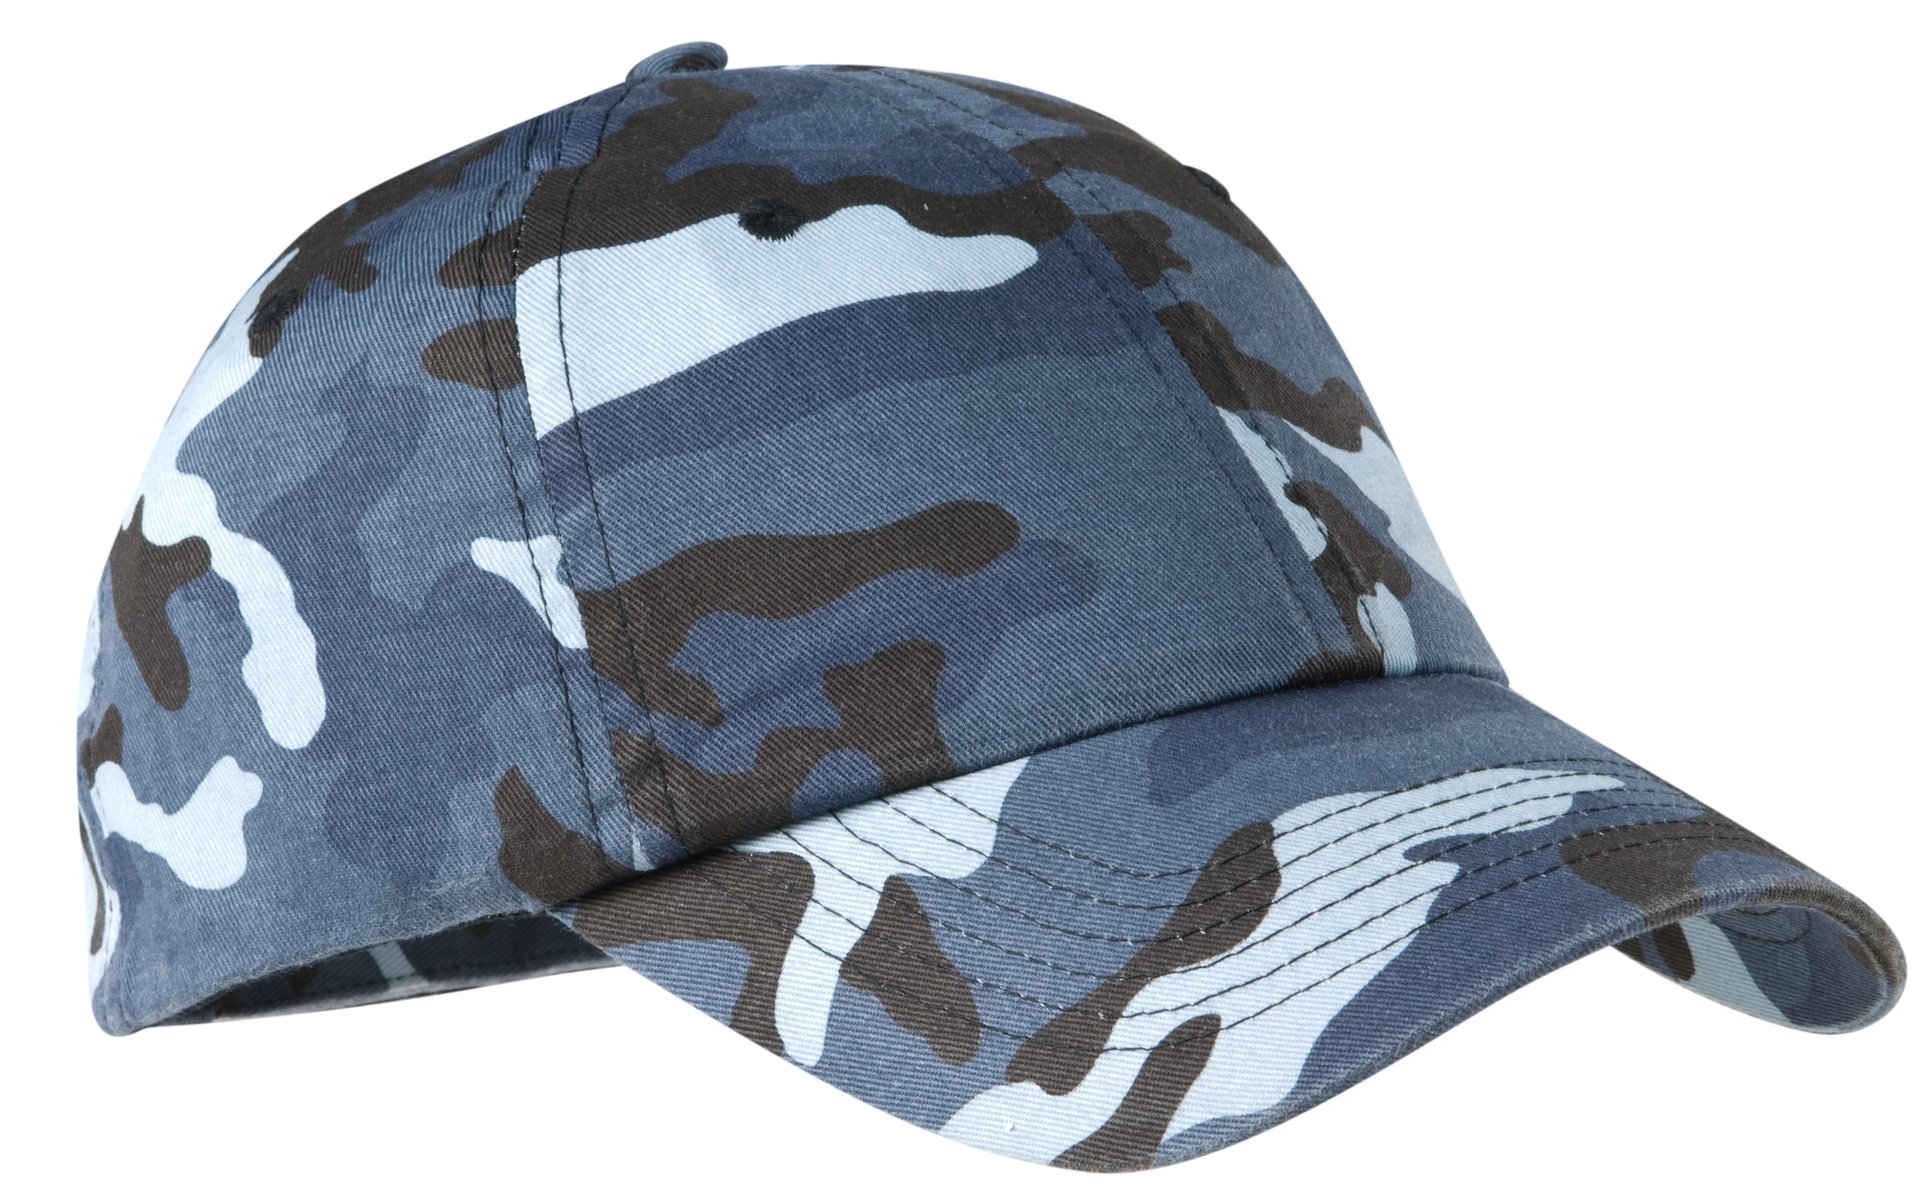 Selected Color is Navy Camo